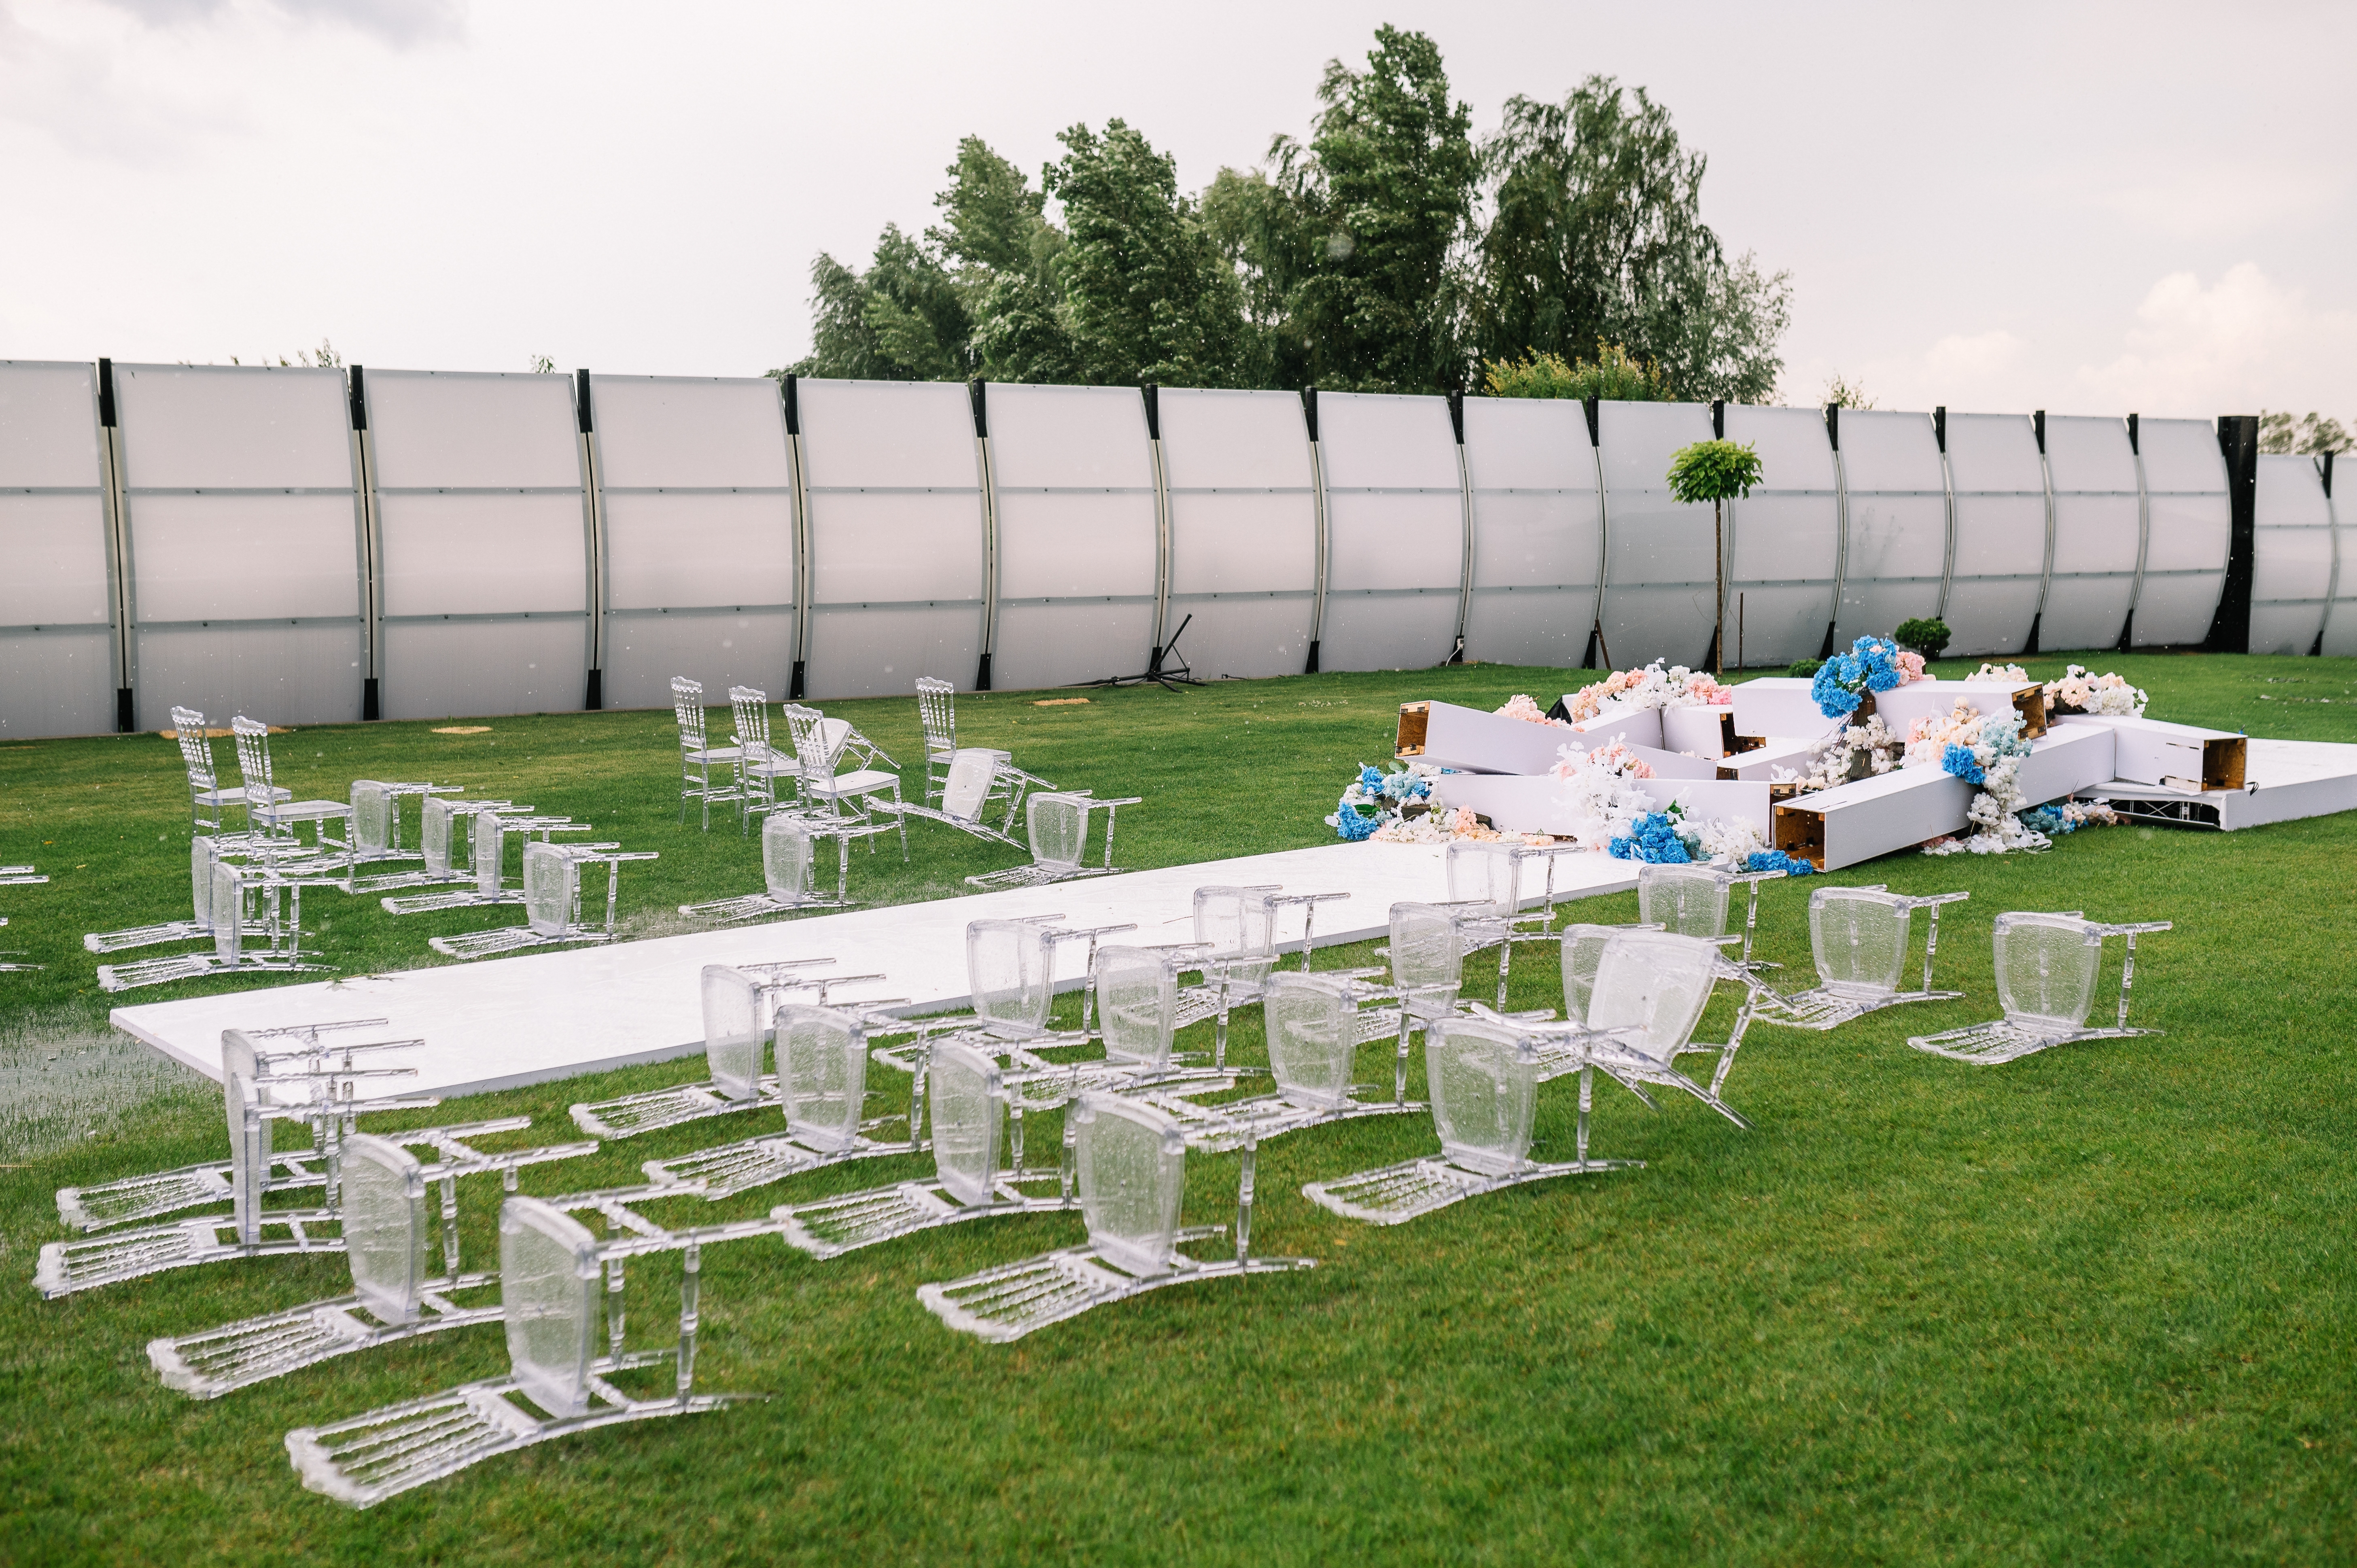 A damaged wedding setup due to rains and strong wind | Source: Shutterstock